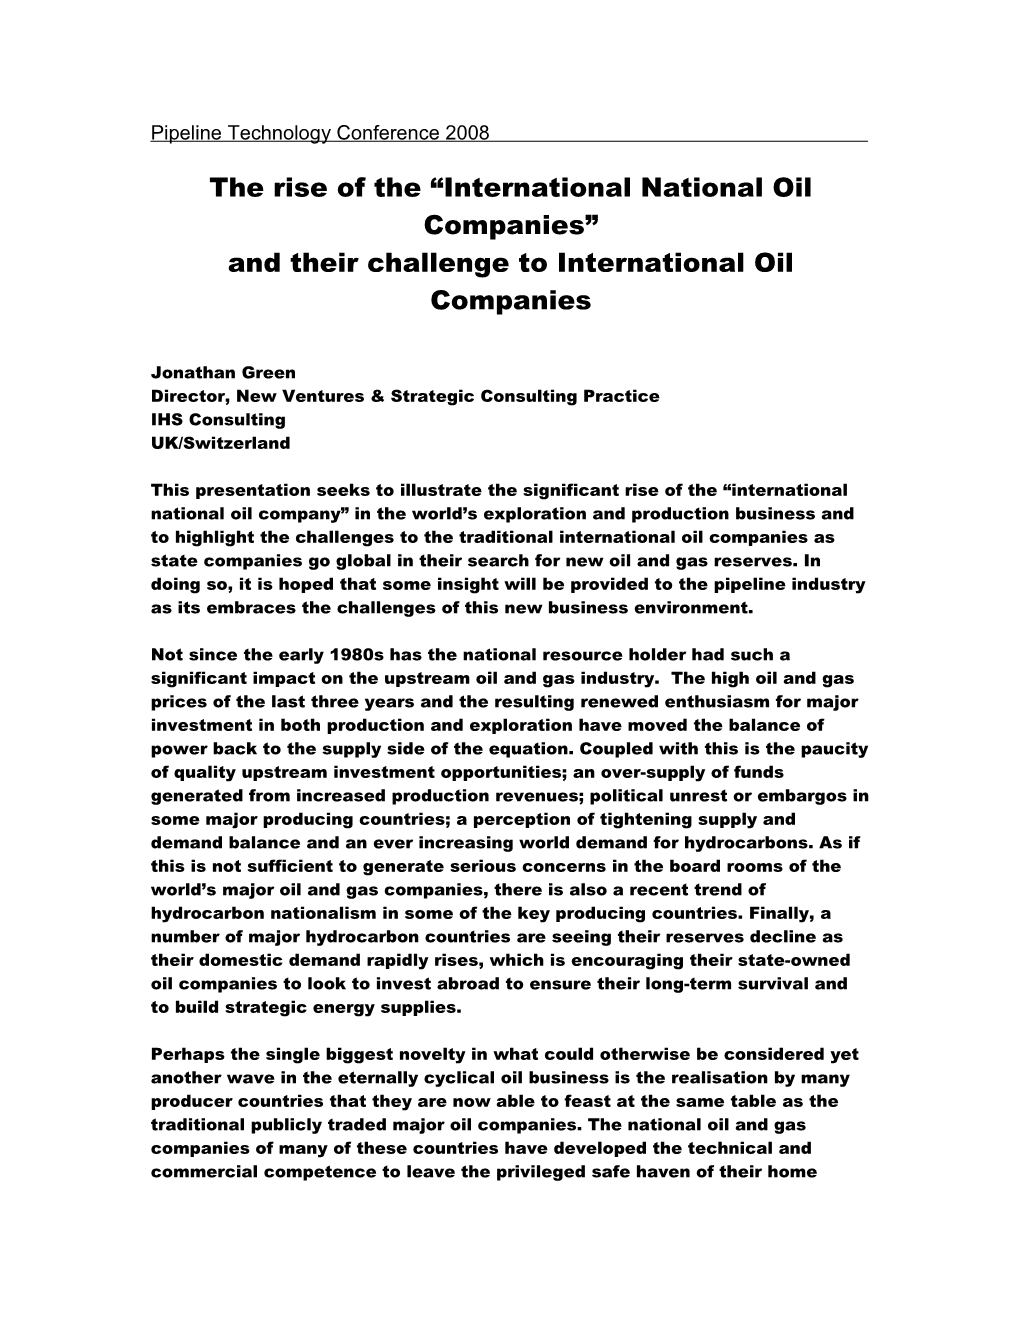 The Rise of National Oil Companies